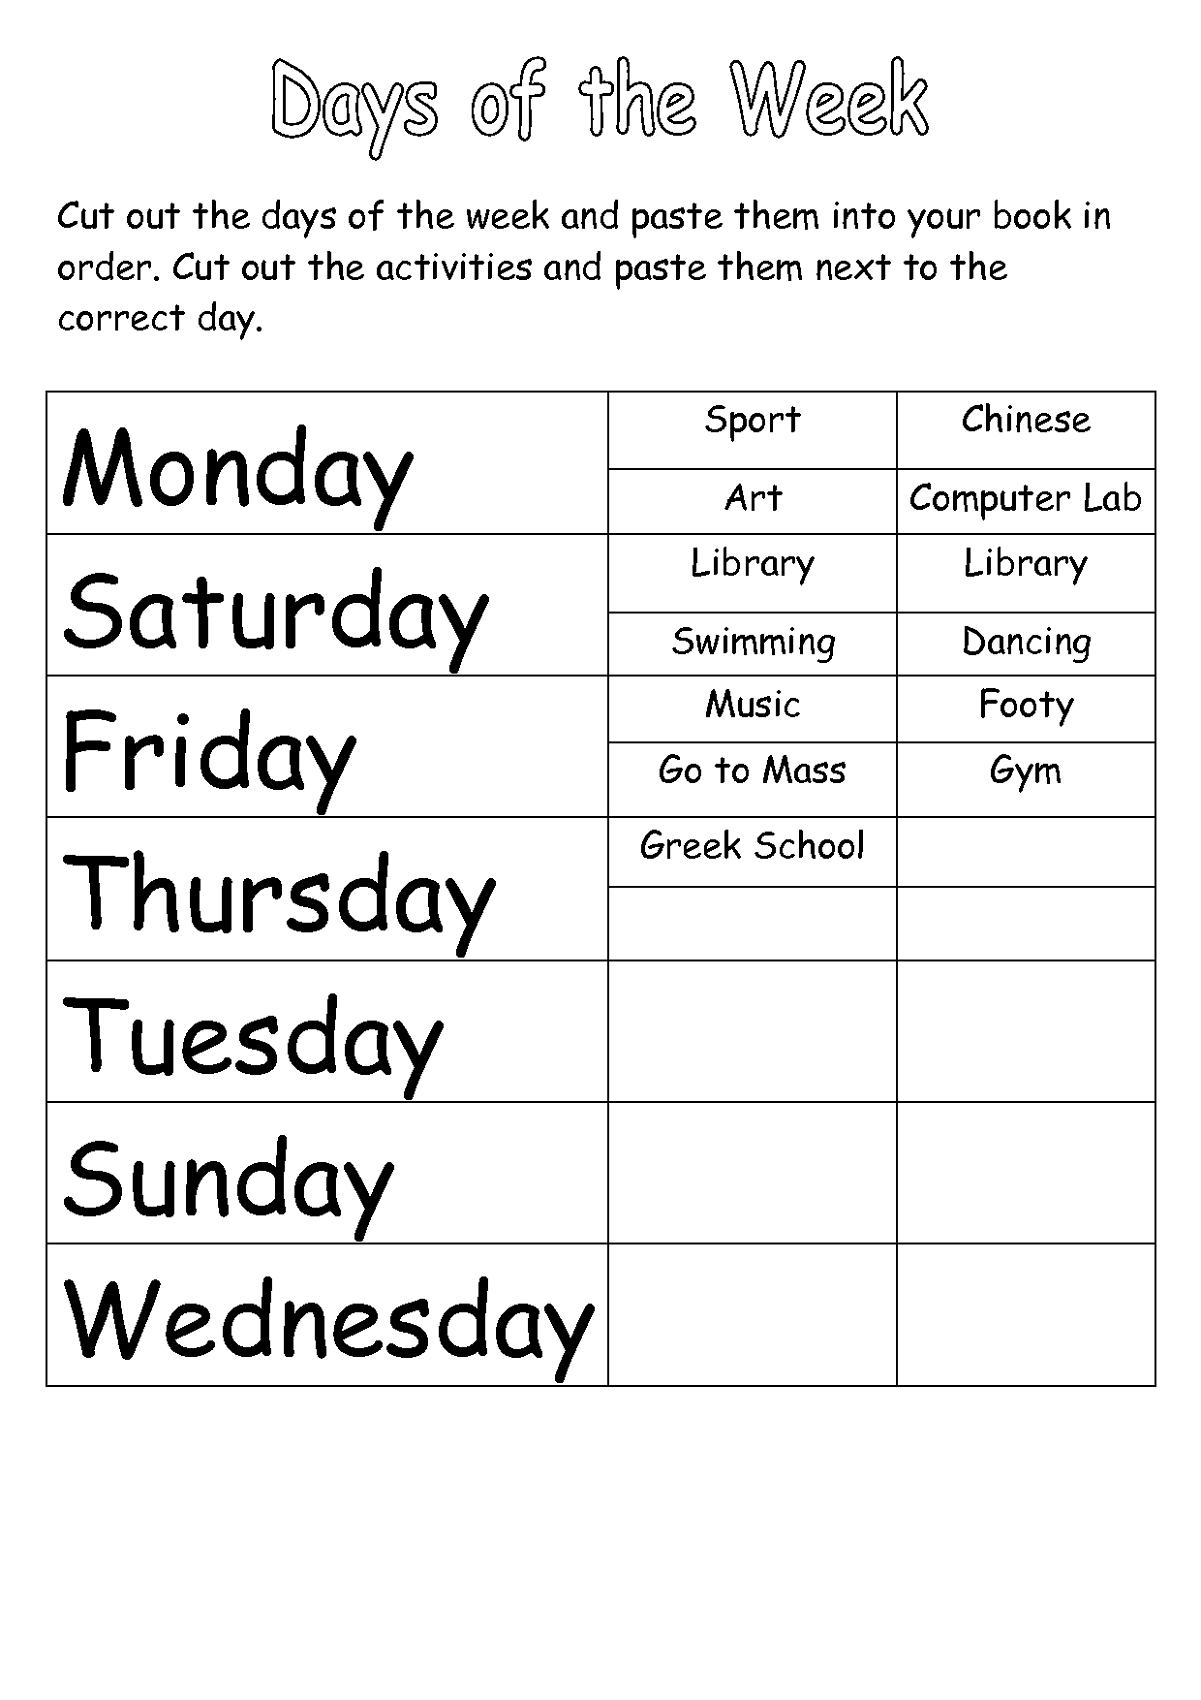 worksheets for days of the week with schedule